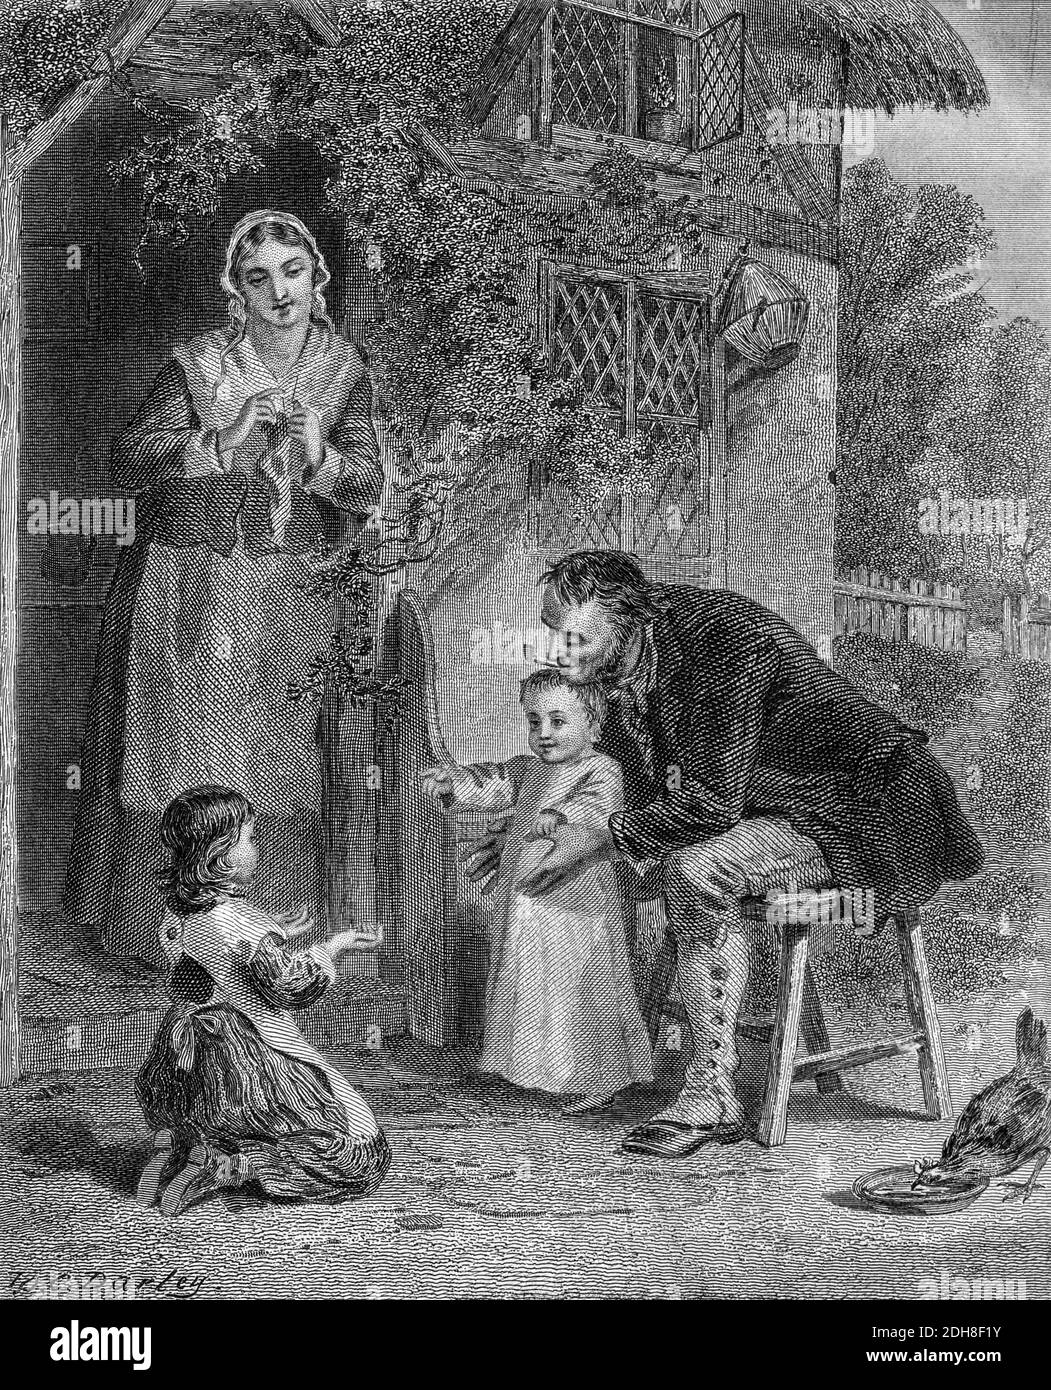 Domestic love - Come Baby Come. from Godey's Lady's Book and Magazine, Vol 101 July to December 1880 in Philadelphia Stock Photo